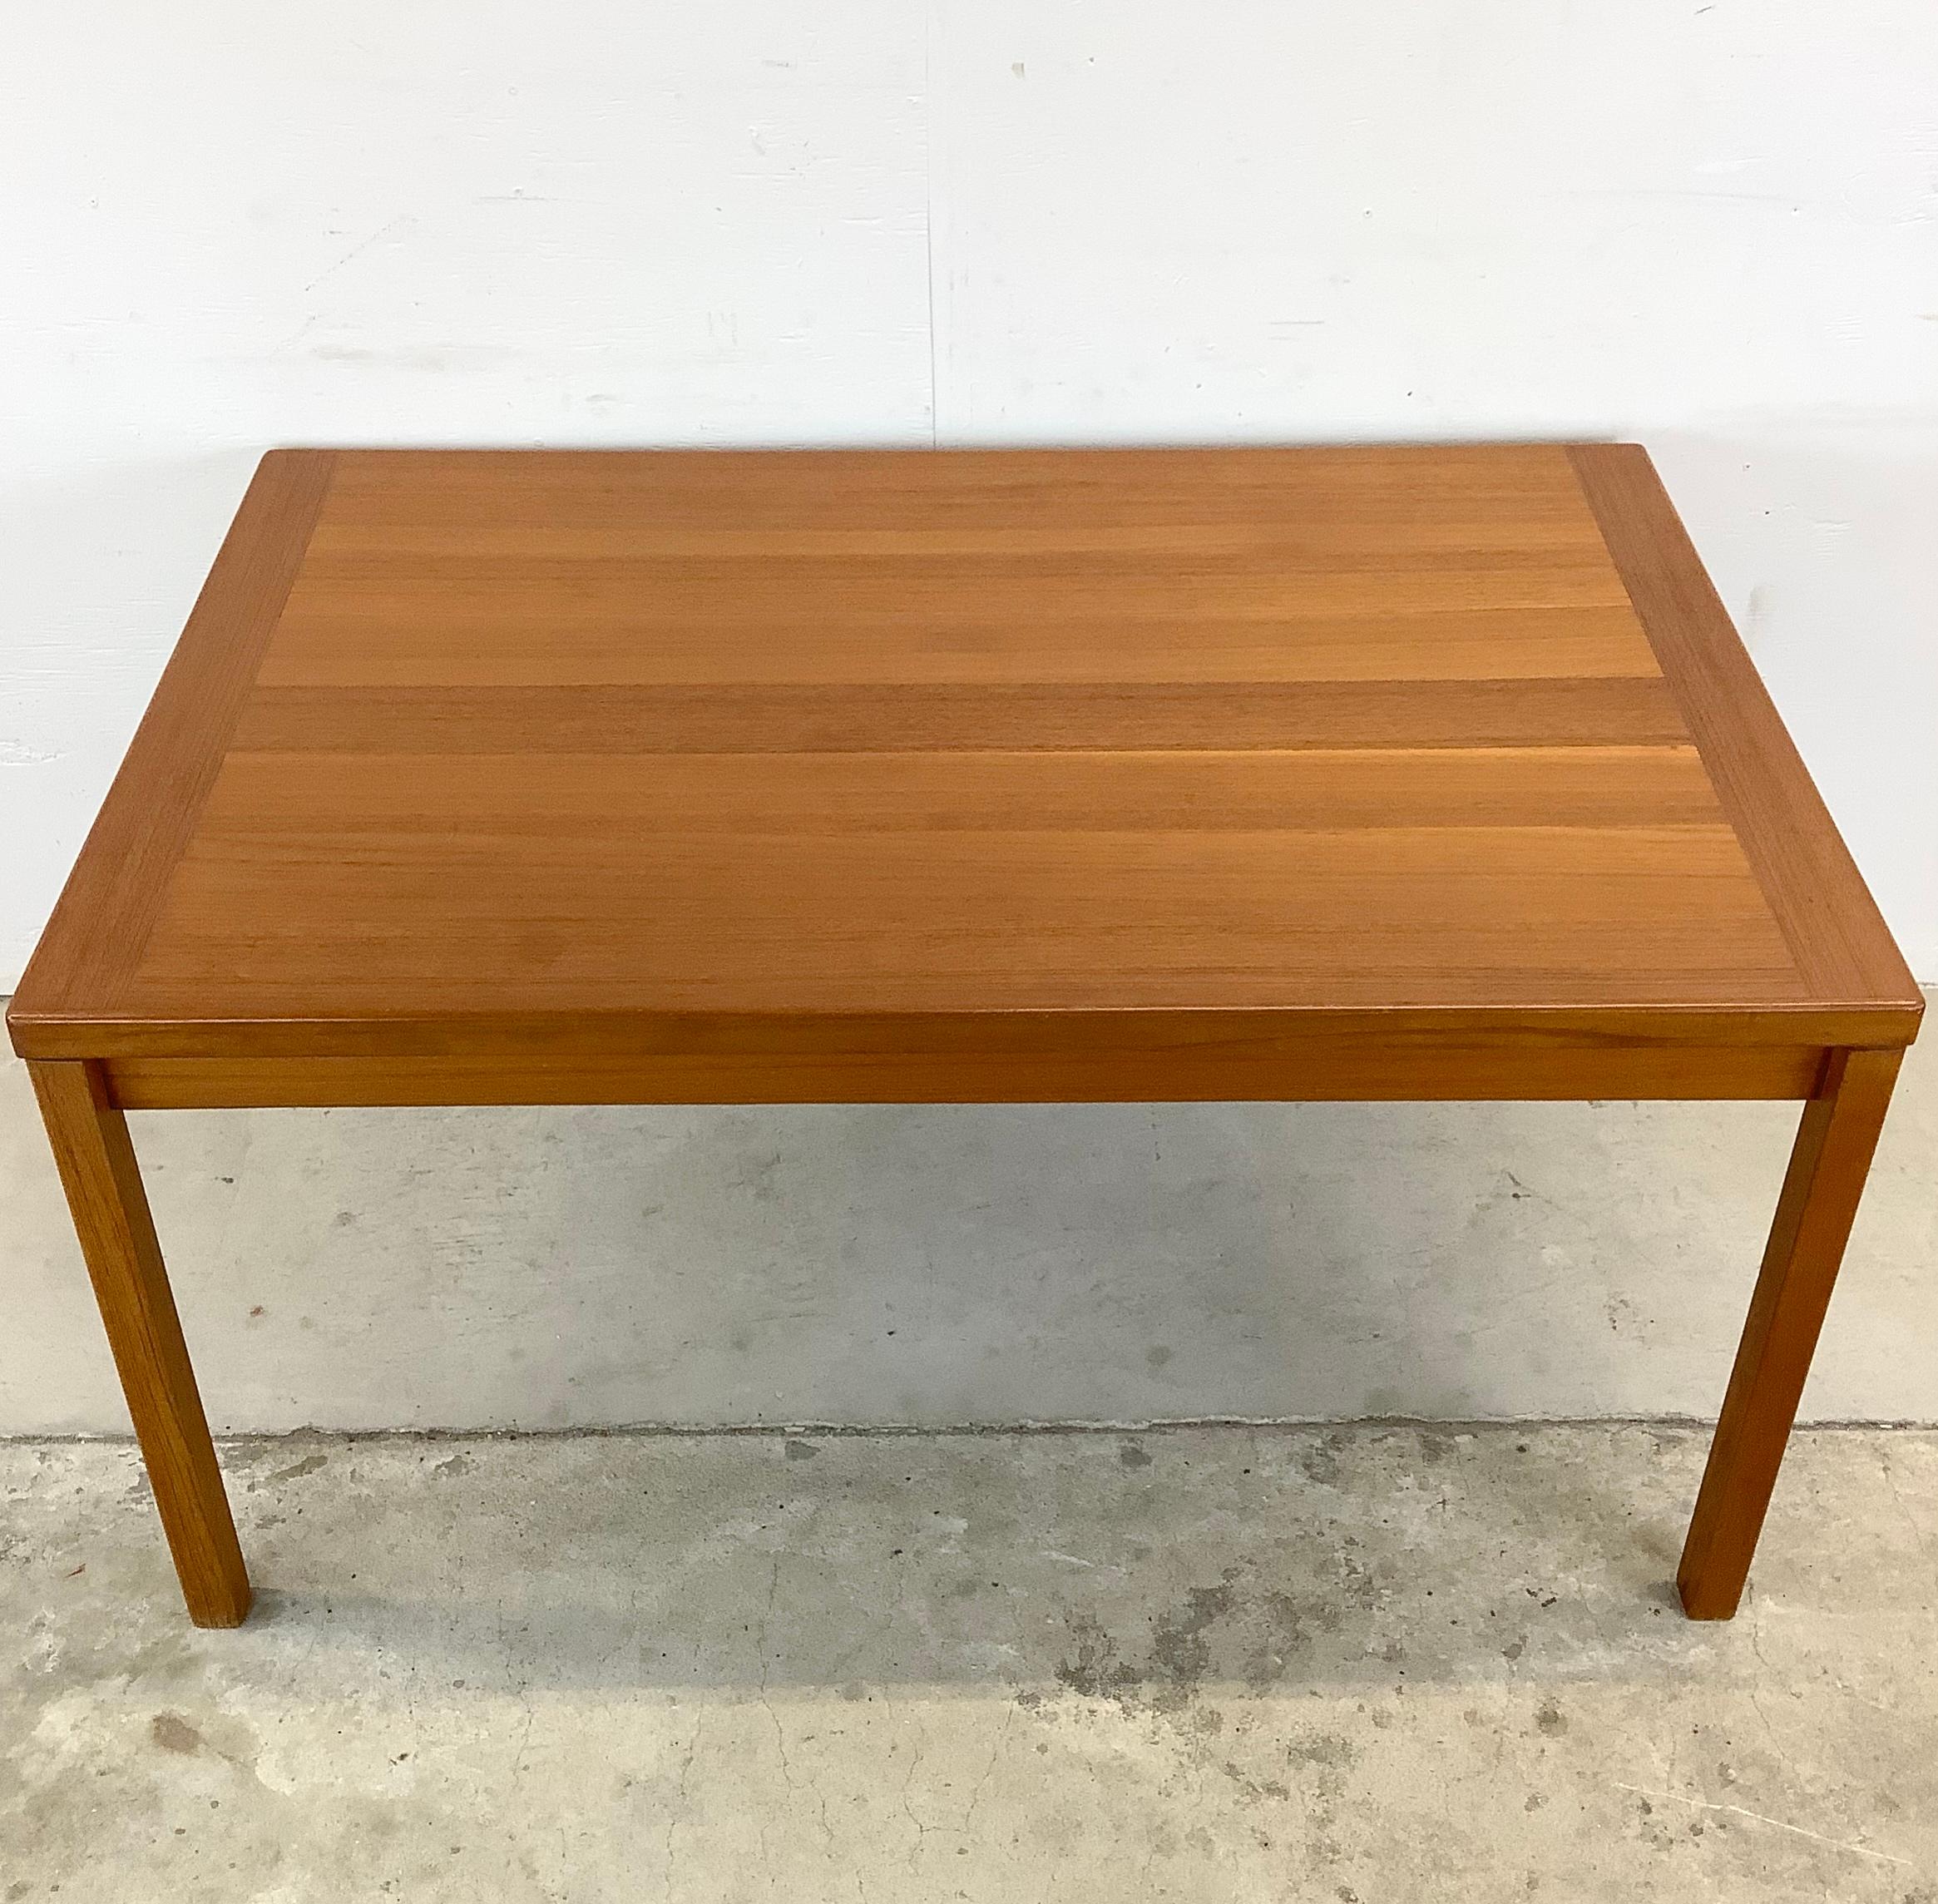 This Vintage Teak Draw Leaf Dining Table is the epitome of timeless elegance and Scandinavian Modern style. A true gem that brings warmth, character, and a touch of mid-century Danish charm to any dining space. Crafted from vintage teak wood, this